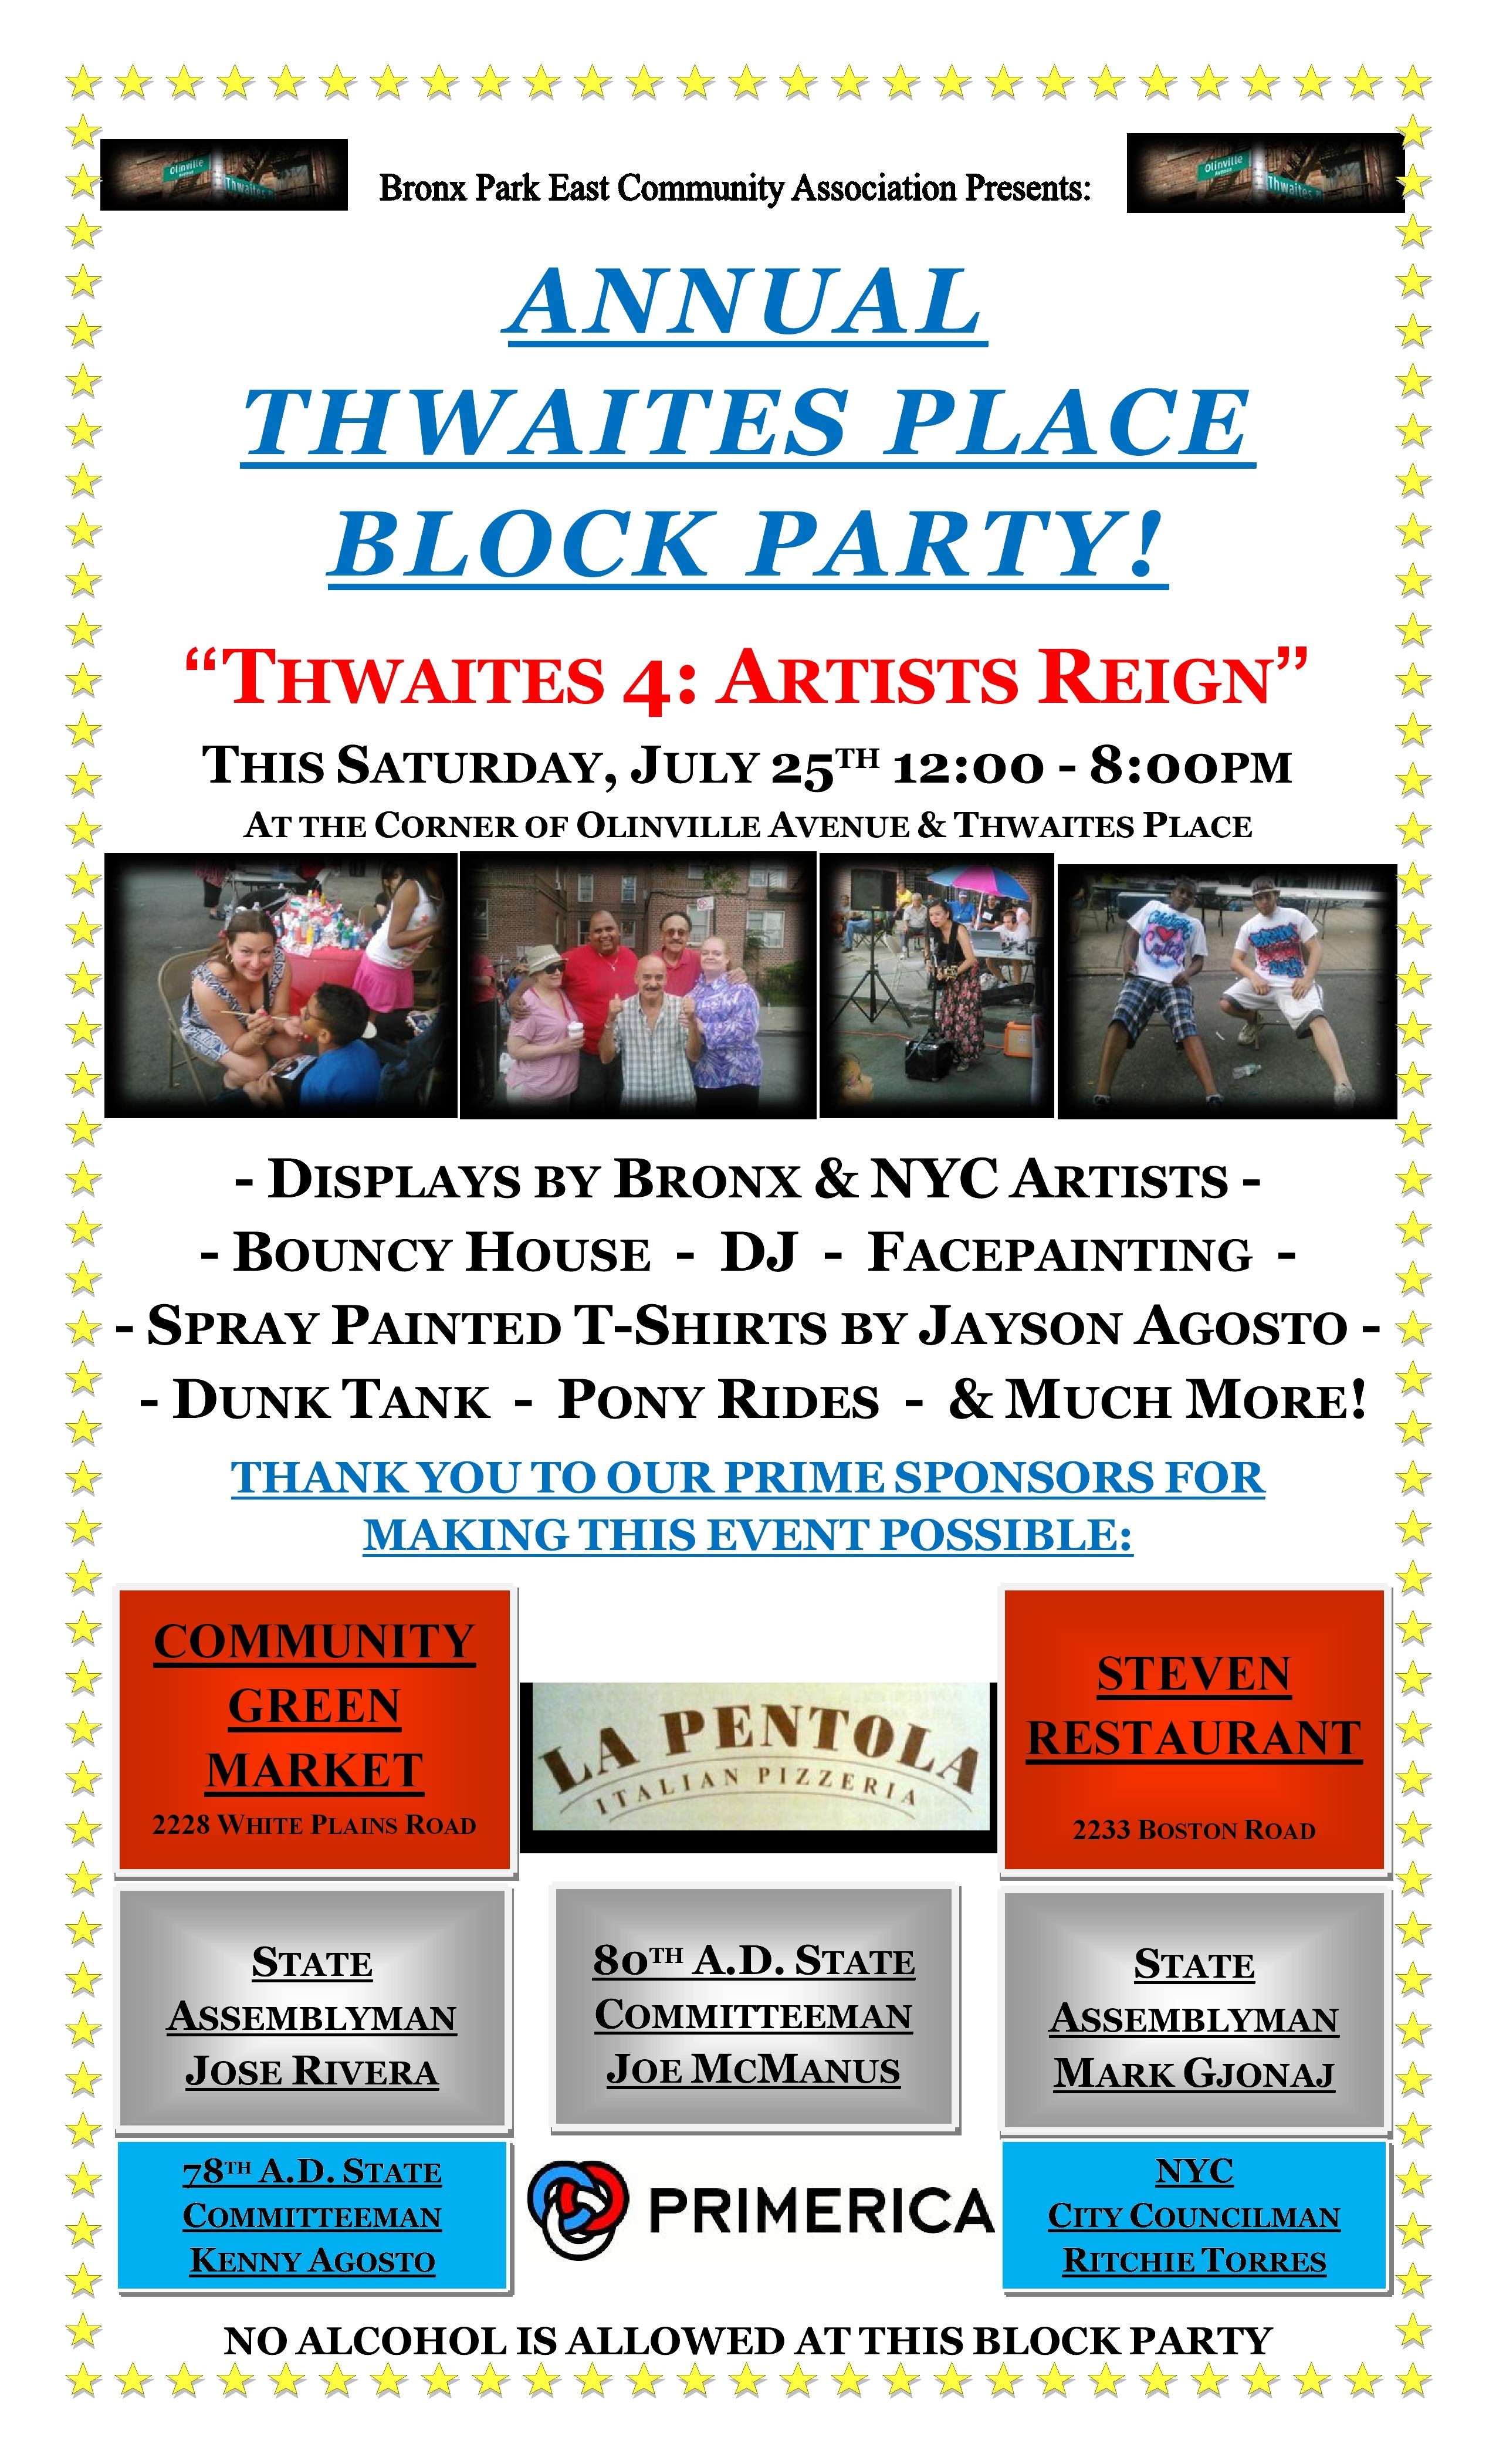 Flyer - July 25th 2015 Thwaites Block Party Page 1 of 3